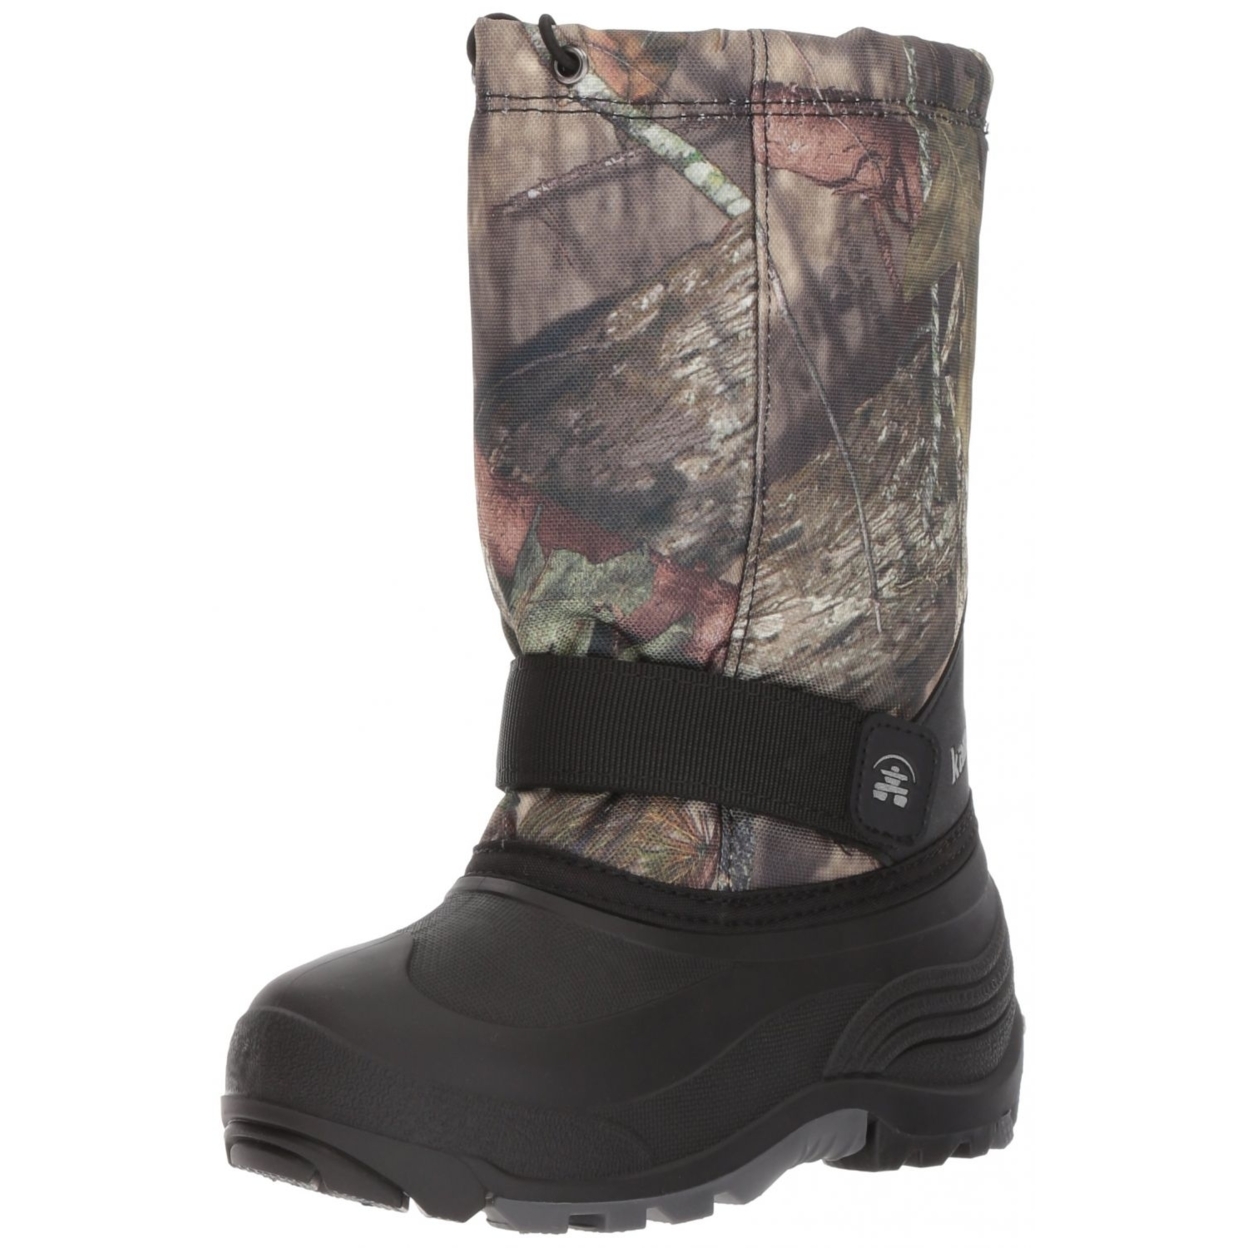 Kamik Rocket Cold Weather Boot (Toddler/Little Kid/Big Kid) 9 Toddler MOSSY OAK COUNTRY CAMO - MOSSY OAK COUNTRY CAMO, 3 Little Kid